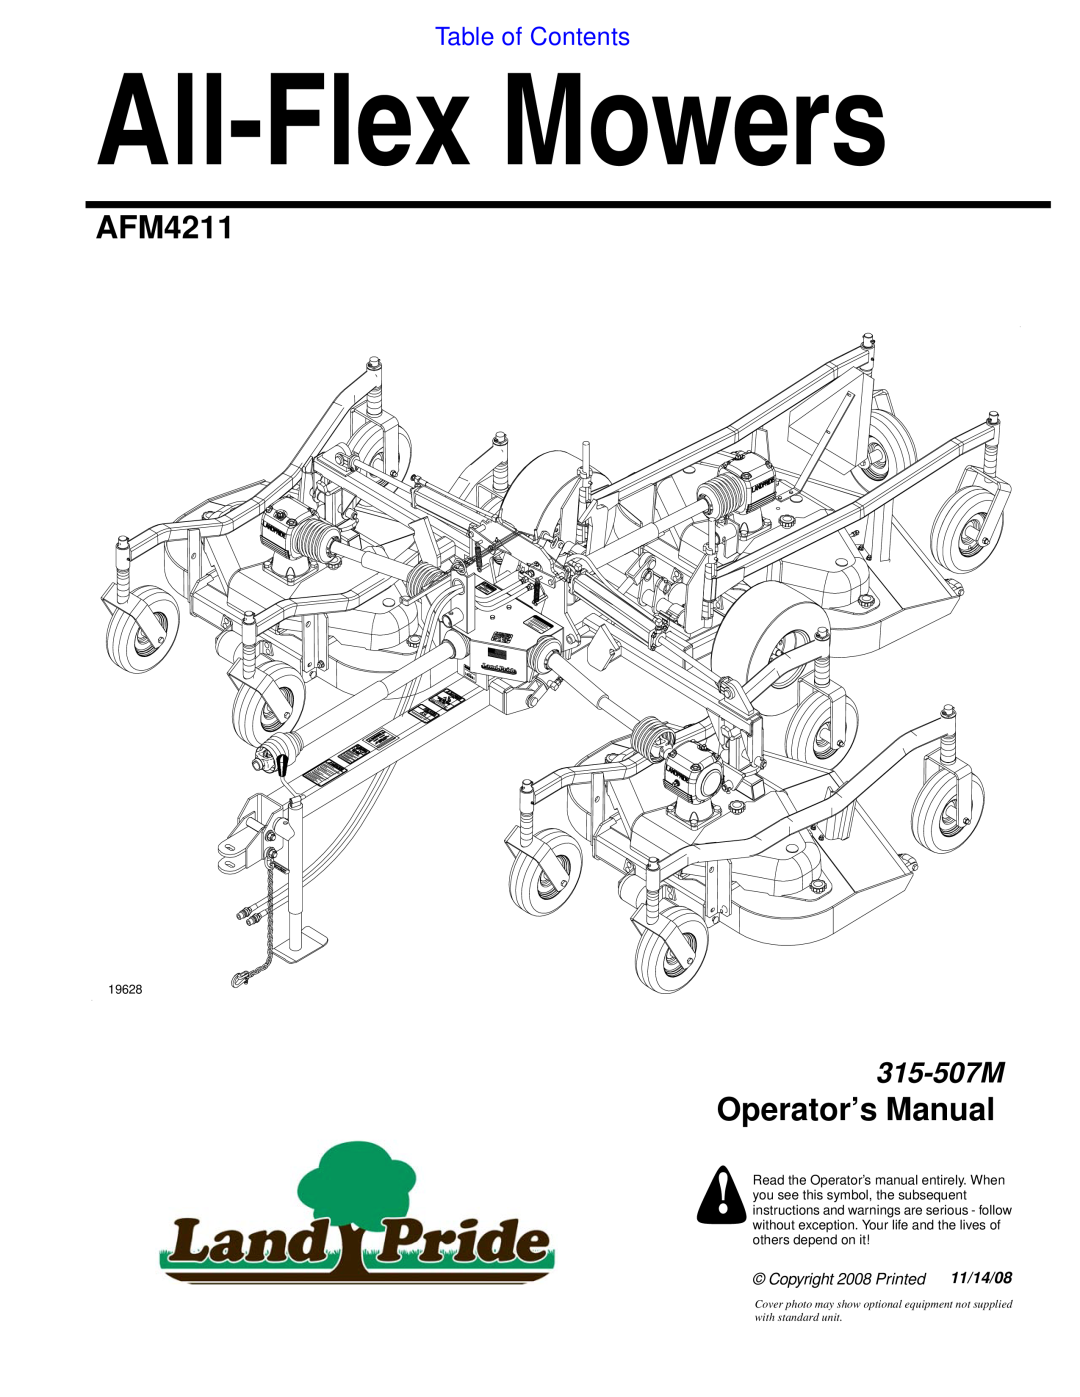 Land Pride AFM4211 manual Table of Contents, All-Flex Mowers, Operator’s Manual, 315-507M, 11/14/08, others depend on it 